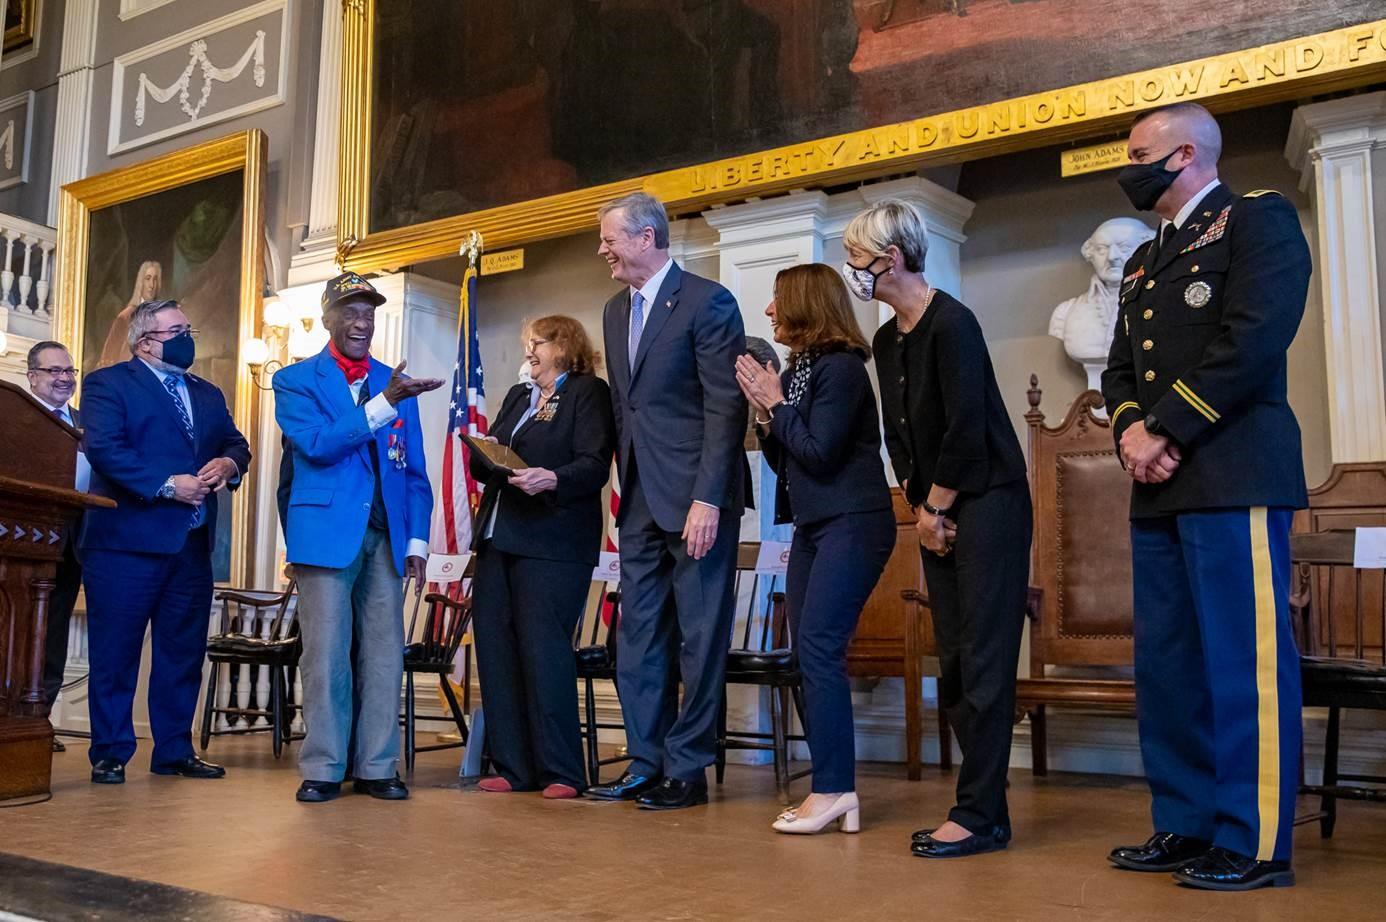 MC Mike Nikitas, Boston Veterans' Services Commissioner Robert Santiago, Lt. Col. Woody Woodhouse, DVS Secretary Cheryl Lussier Poppe, Governor Charlie Baker, Lt. Governor Polito, HHS Secretary Marylou Sudders, and MANG Col. Oberton smile as Lt. Col Woodhouse receives award. 